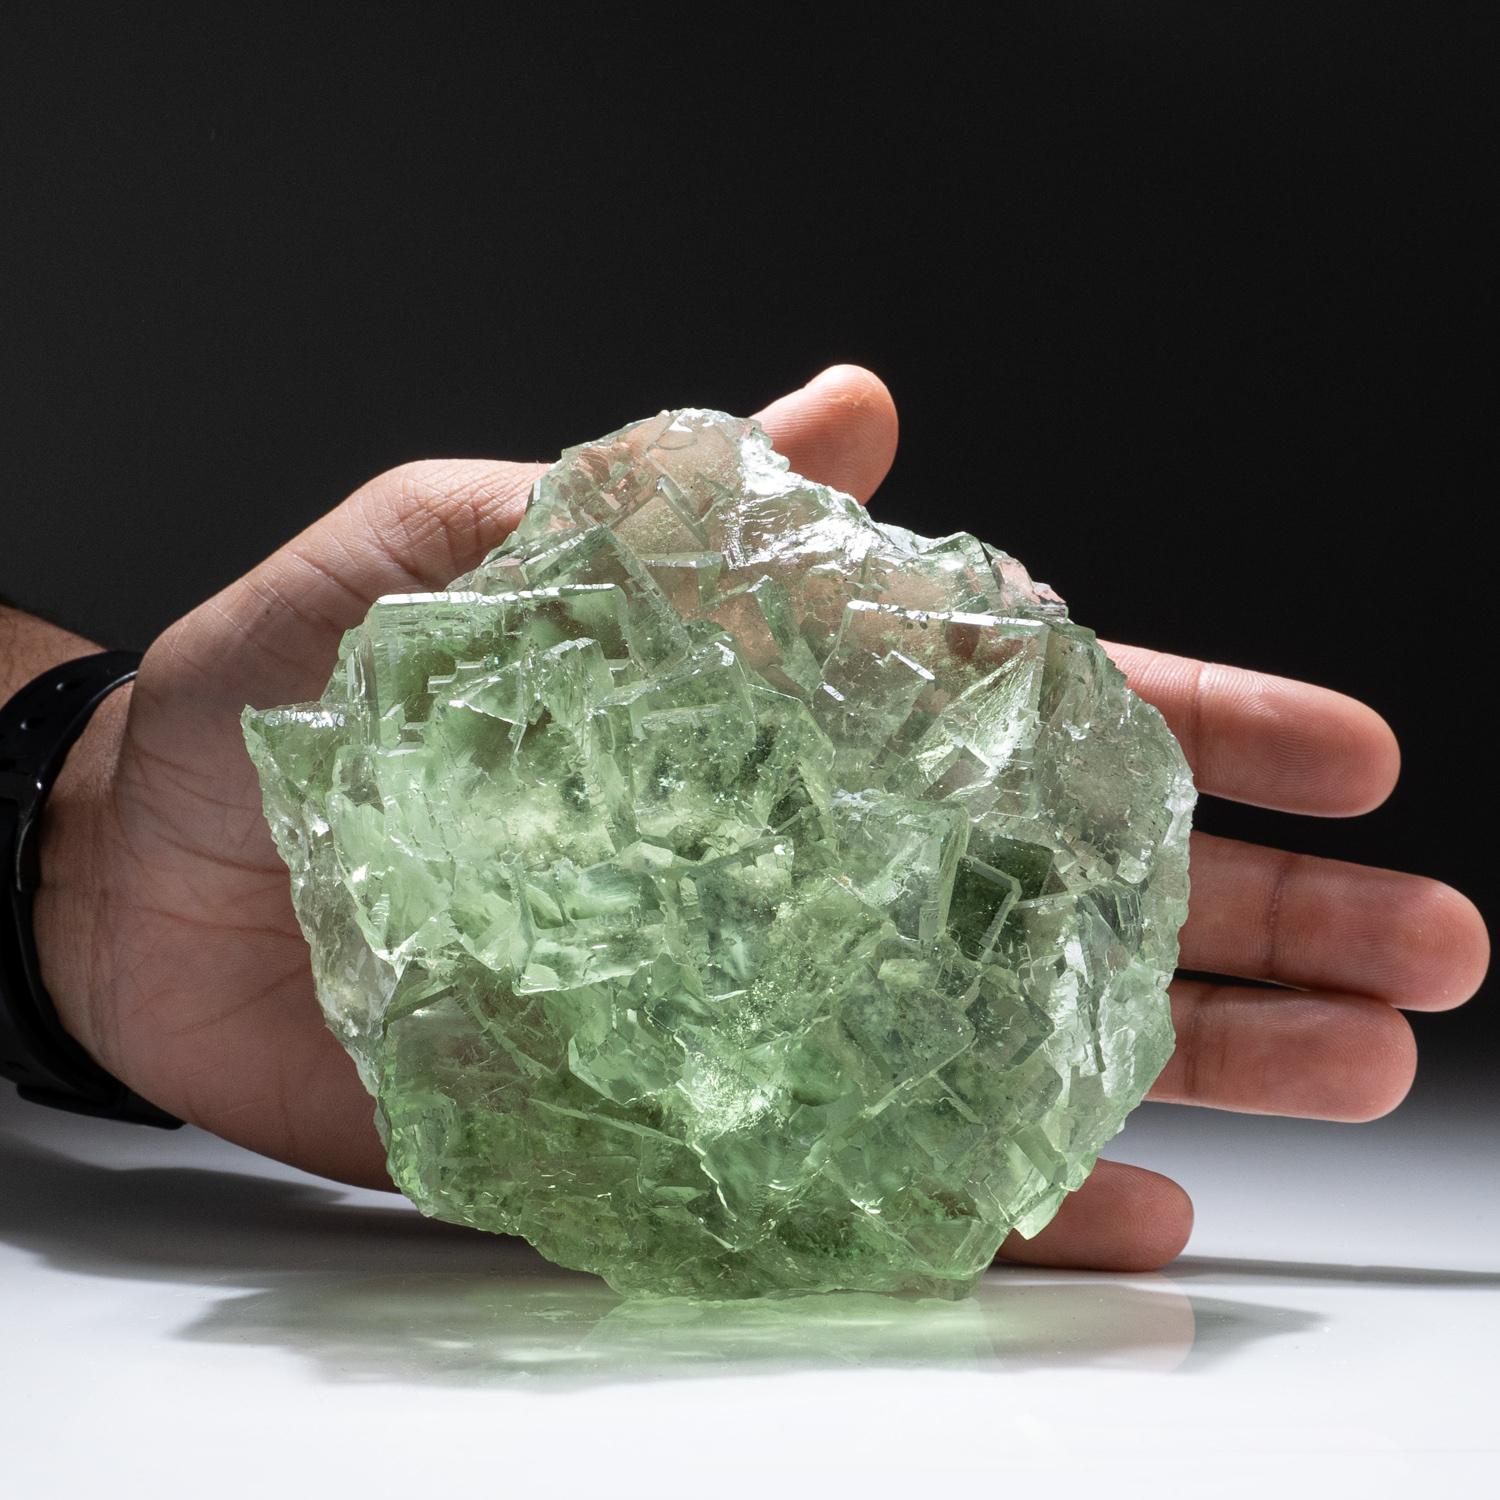 From Xianghualing, Hunan Province, China

Internally clear transparent crystal cluster of vivid green cubic fluorite crystals on matrix. The matrix is clearly visible through the crystals due to clear transparency. The crystals have well defined